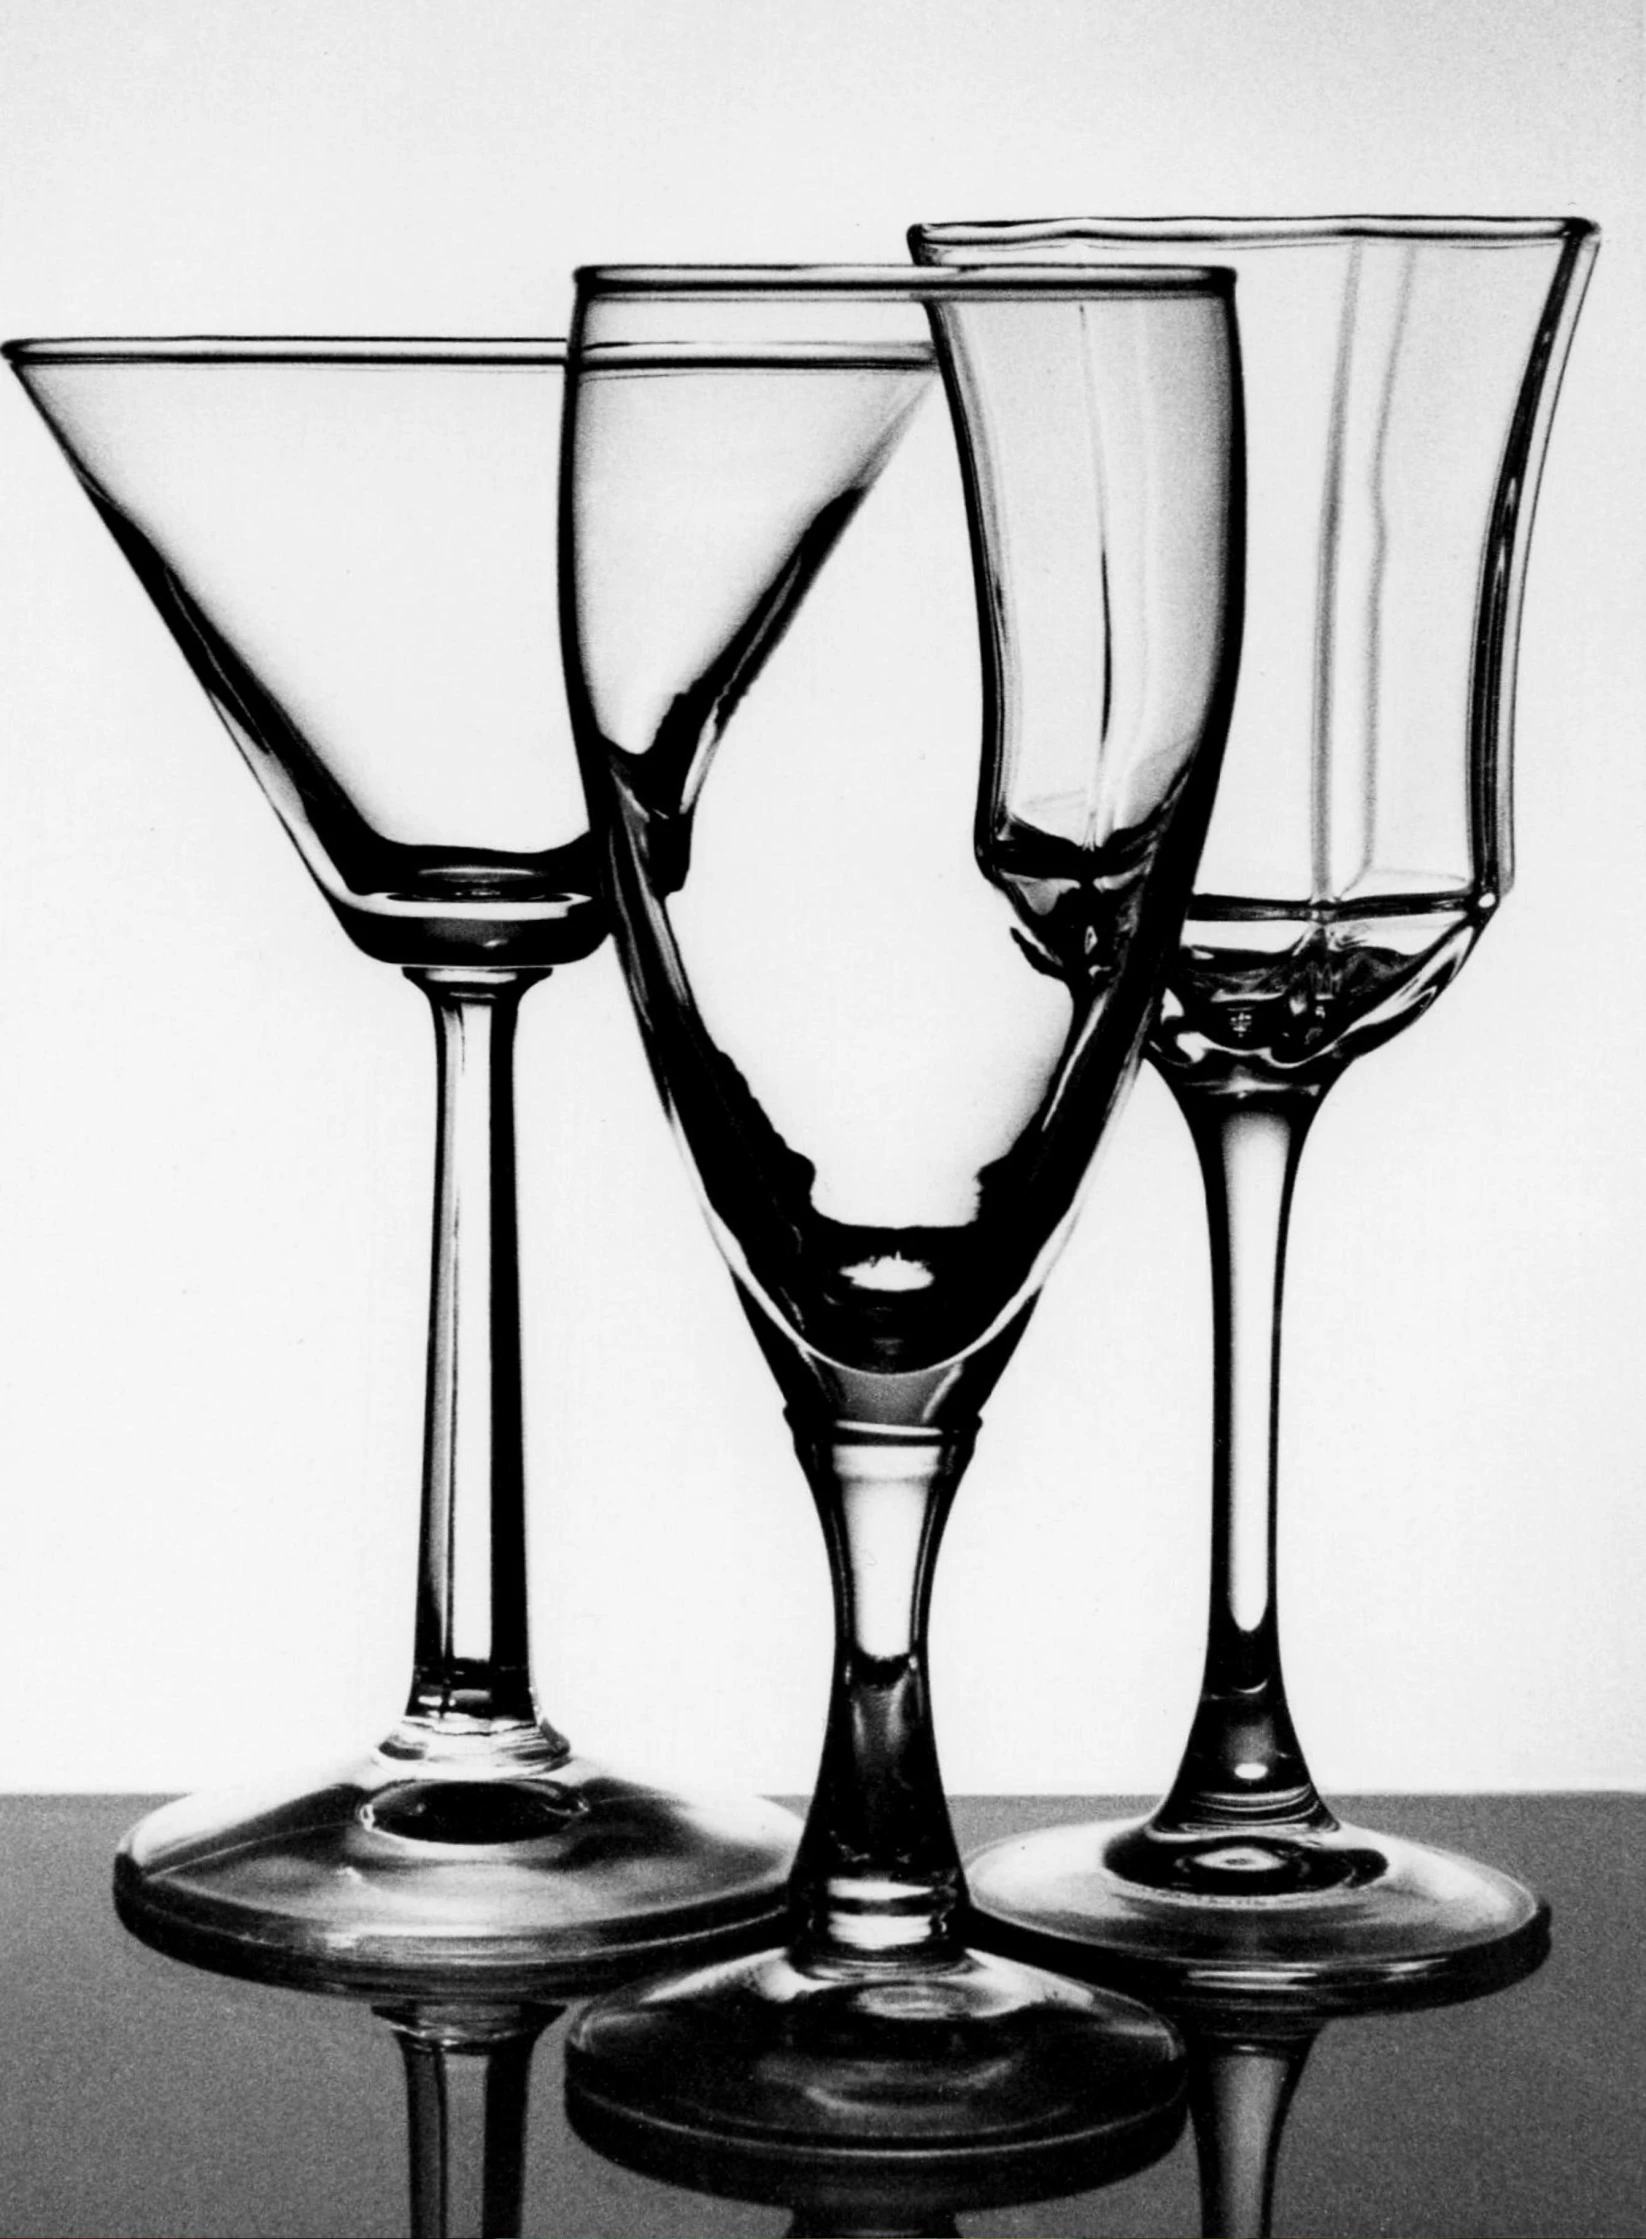 three glasses are shown lined up on the table